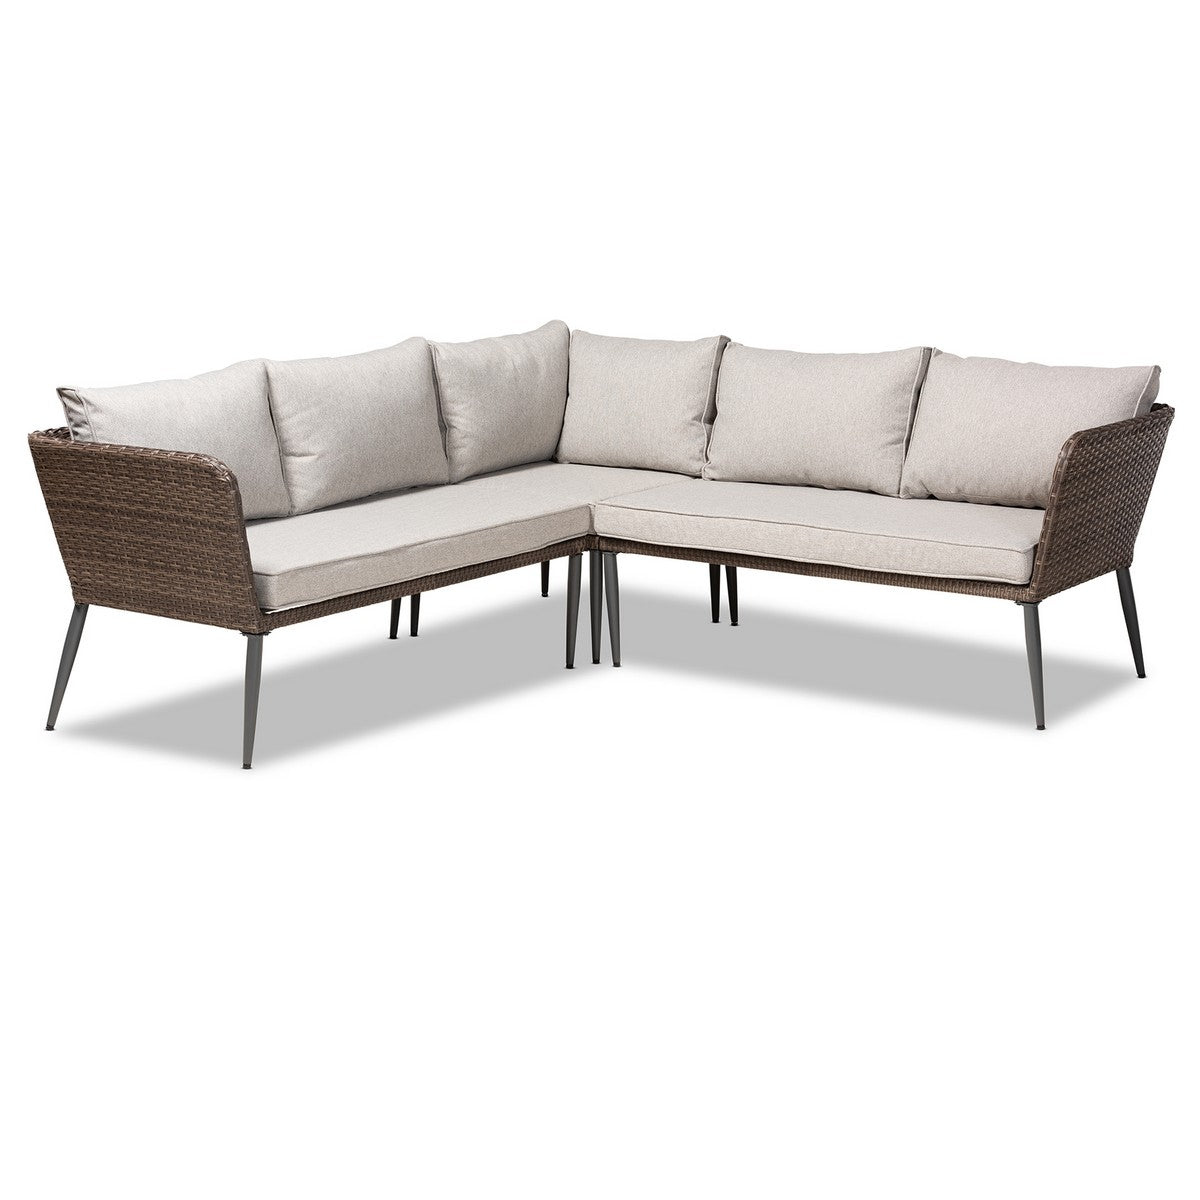 Baxton Studio Lillian Modern and Contemporary Light Grey Upholstered and Brown Finished 5-Piece Woven Rattan Outdoor Patio Set